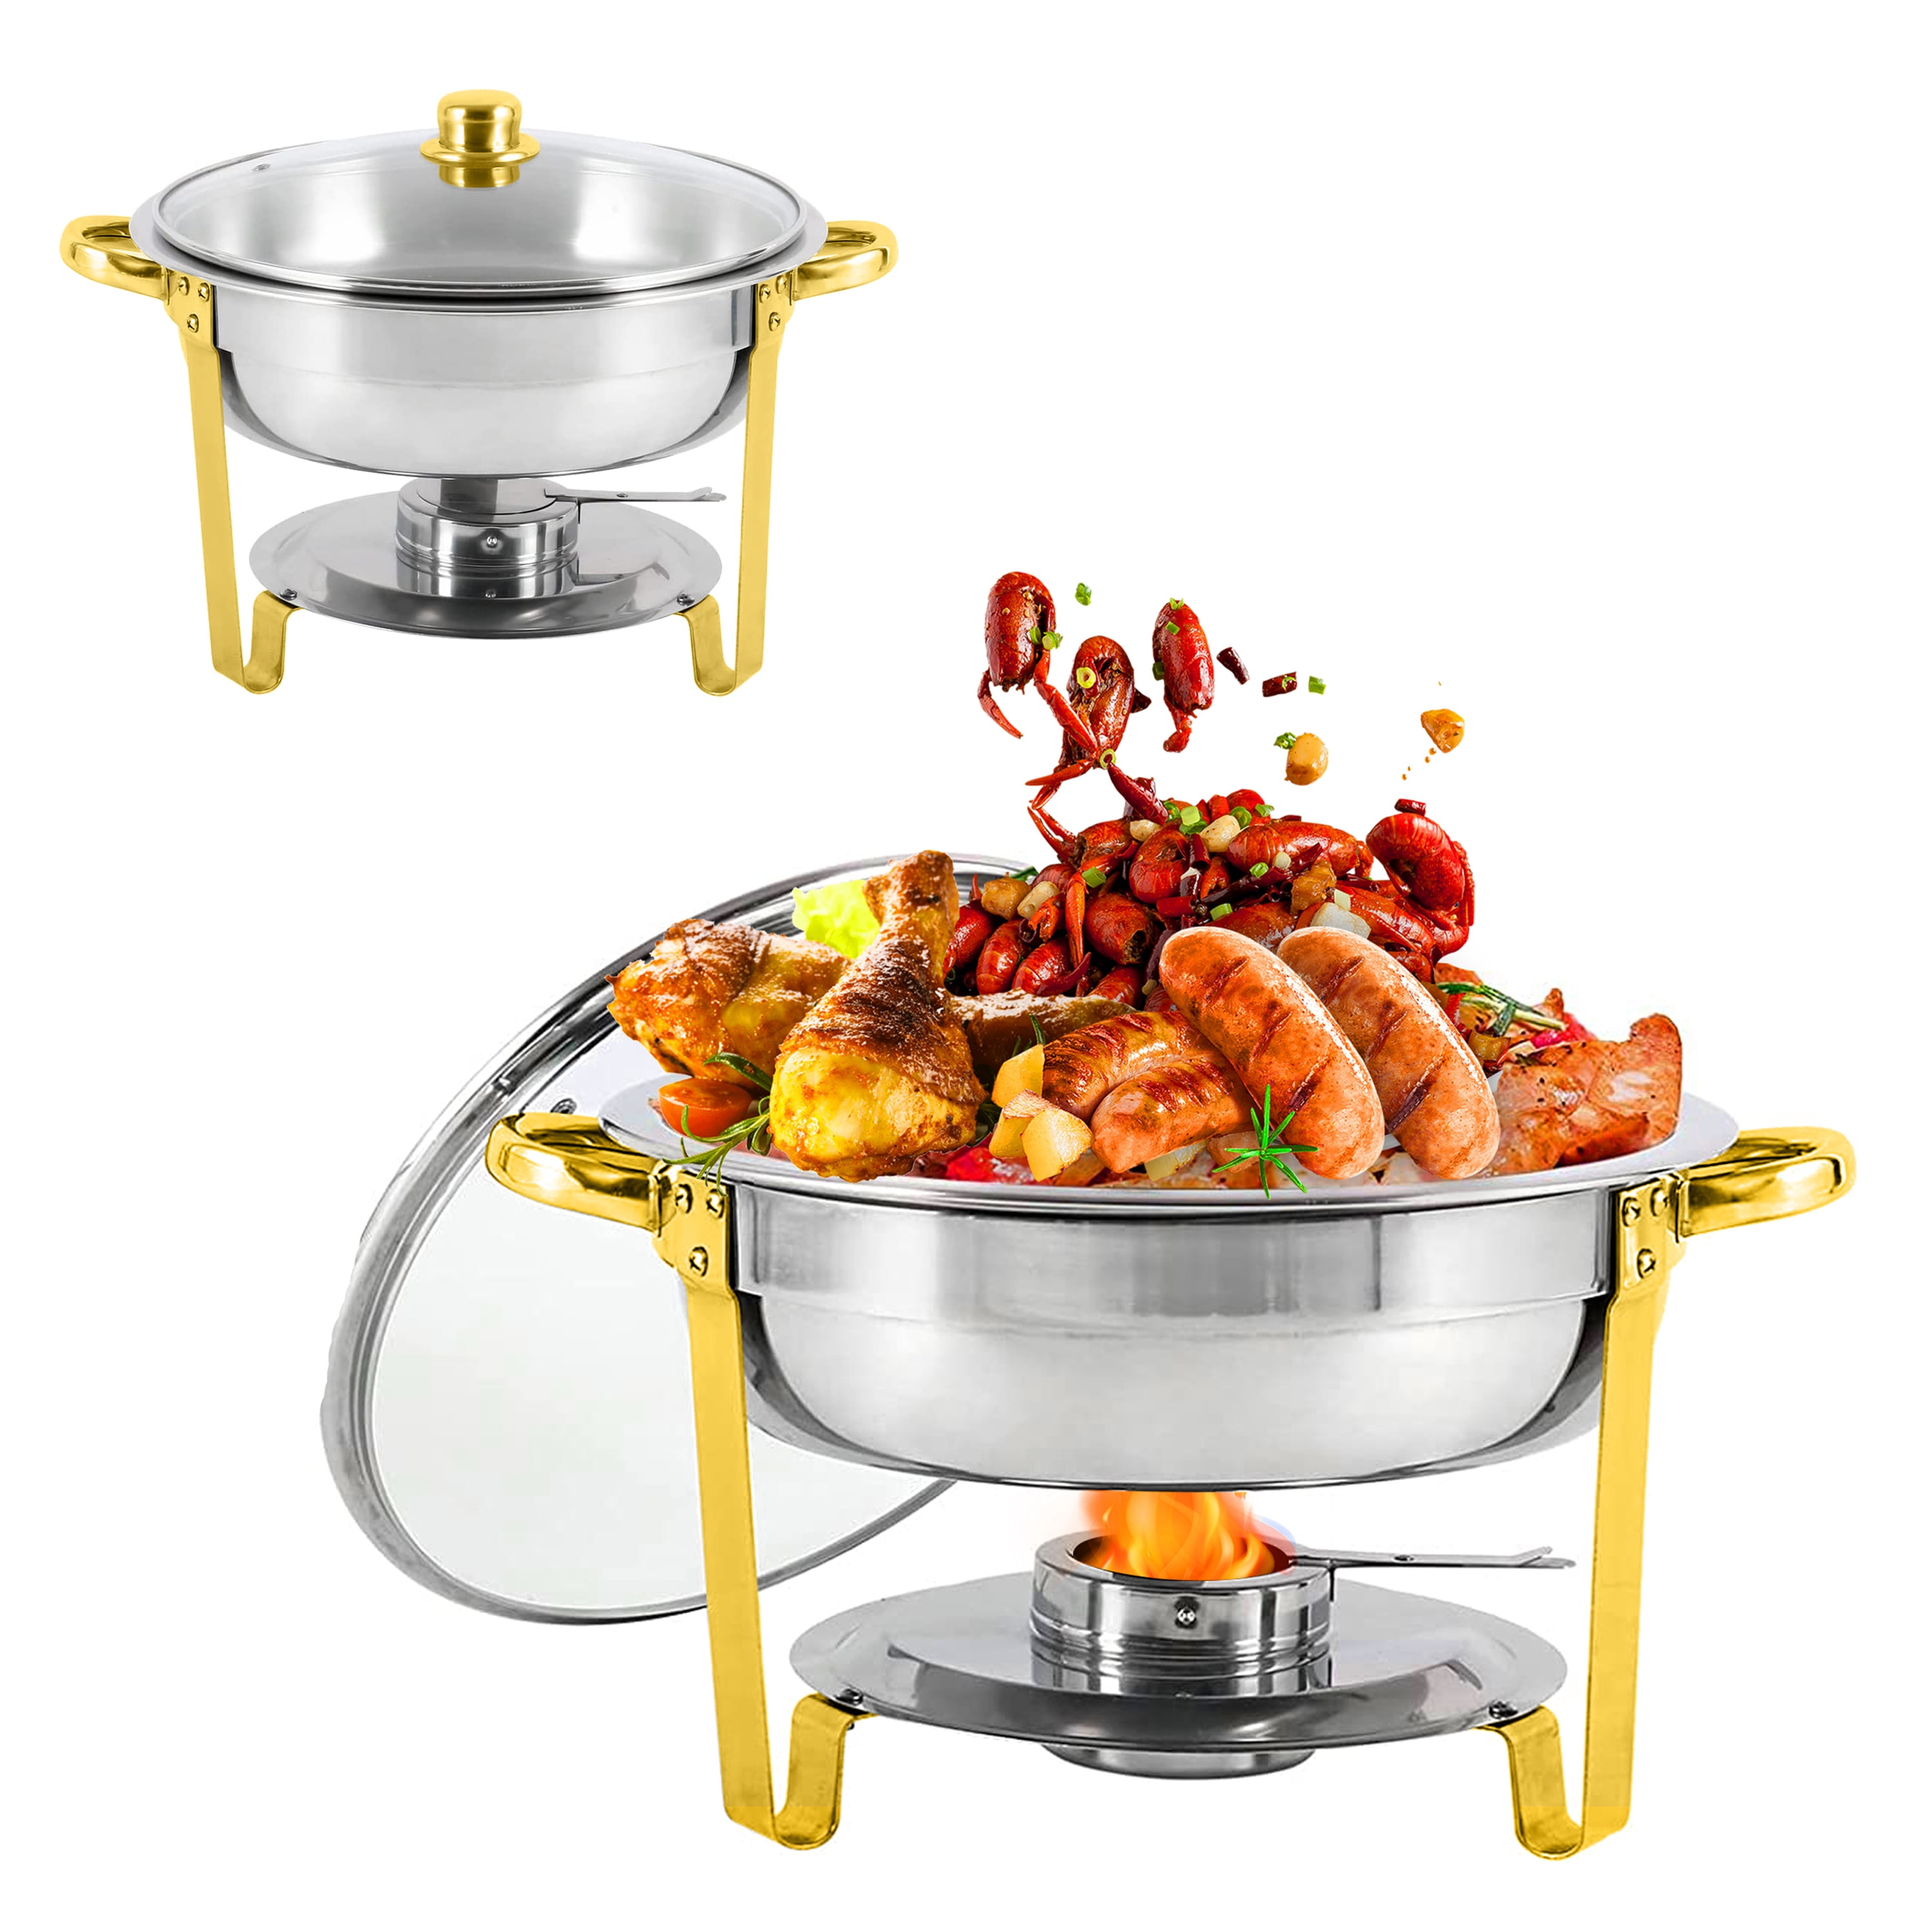 Geetery 2 Pack Stainless Steel Soup Warmer 7 QT Soup Chafer Round Chafers  for Catering with Clear Glass Pot Lid and Fuel Holder, for Catering